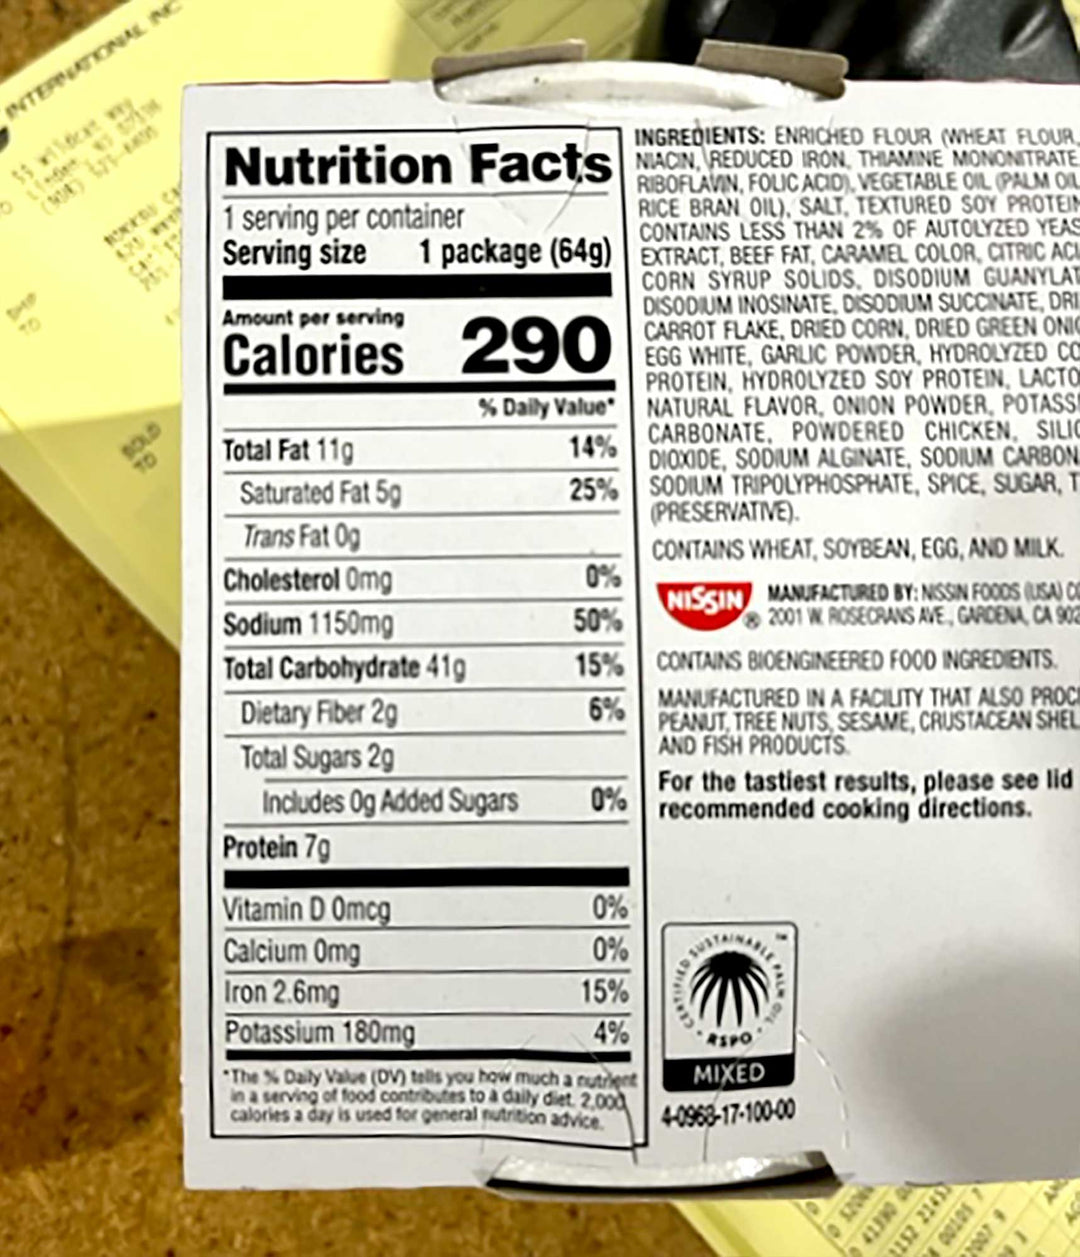 The nutrition facts label on a box of Nissin Cup Noodle: Beef.